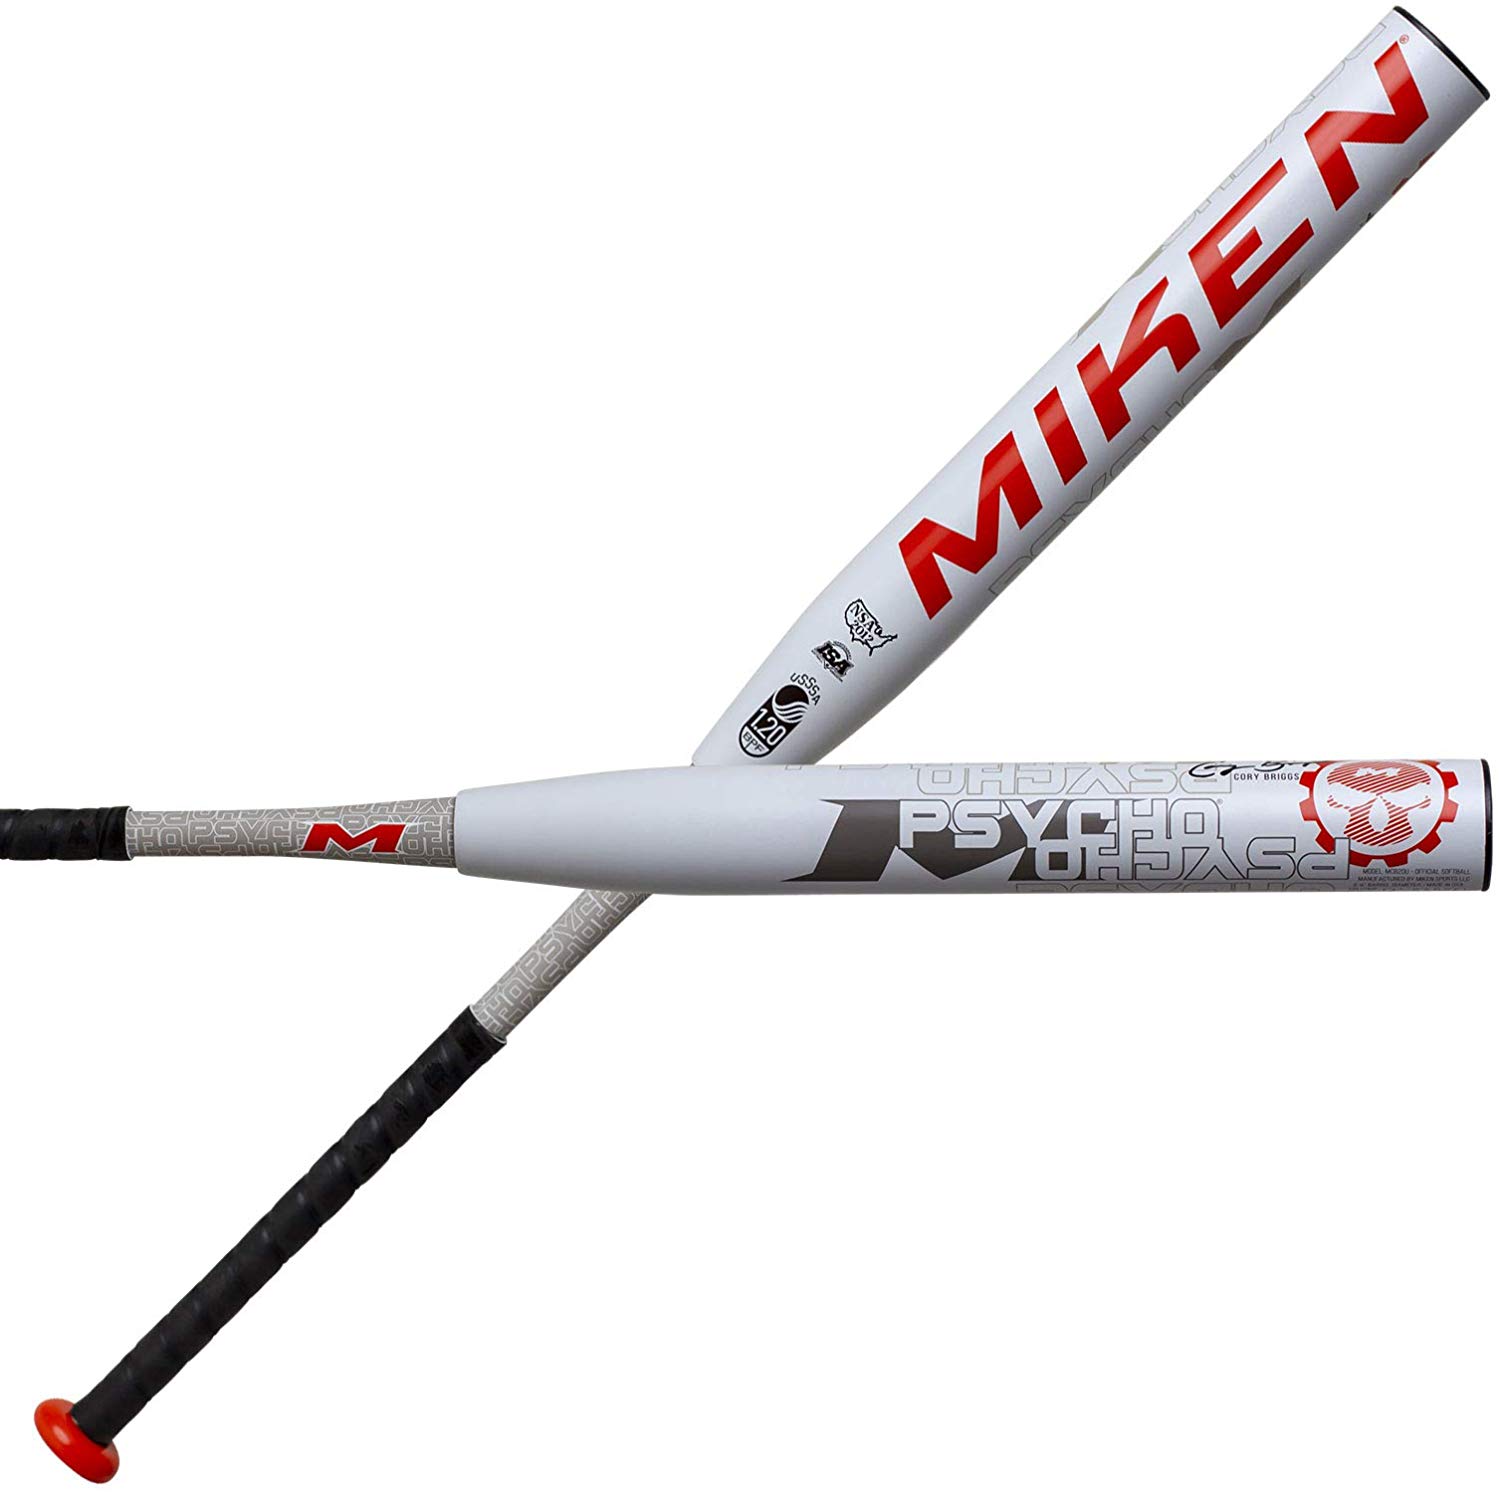 Miken's breakthrough tetra-core tech optimizes performance by utilizing an inner core tube and an outer core layering to maximize the sweetspot and durability Miken's F2P (FLEX 2 Power) optimizes handle flex and increases the overall speed of the bat head through the hitting zone. Miken bats are 100% composite Made in USA. The Cory Briggs Psycho Maxload USSSA bat is built to help you dominate at the plate. Its enhanced technology of the Triple Matrix Core optimizes our exclusive aerospace grade material offers superior performance and durability. In addition, the F2P handle flex is engineered to maximize swing speed to get the barrel through the zone faster for optimal power. Get more pop at the plate, buy yours now! Made in the U.S.A.  Size:   2 1/4 in  Frame:   Two-Piece  Player:   Cory Briggs  Technology:   Triple Matrix Core, 100 COMP  Series:   Signature Series  Warranty:   1 Year  Barrel Length:   14 in 